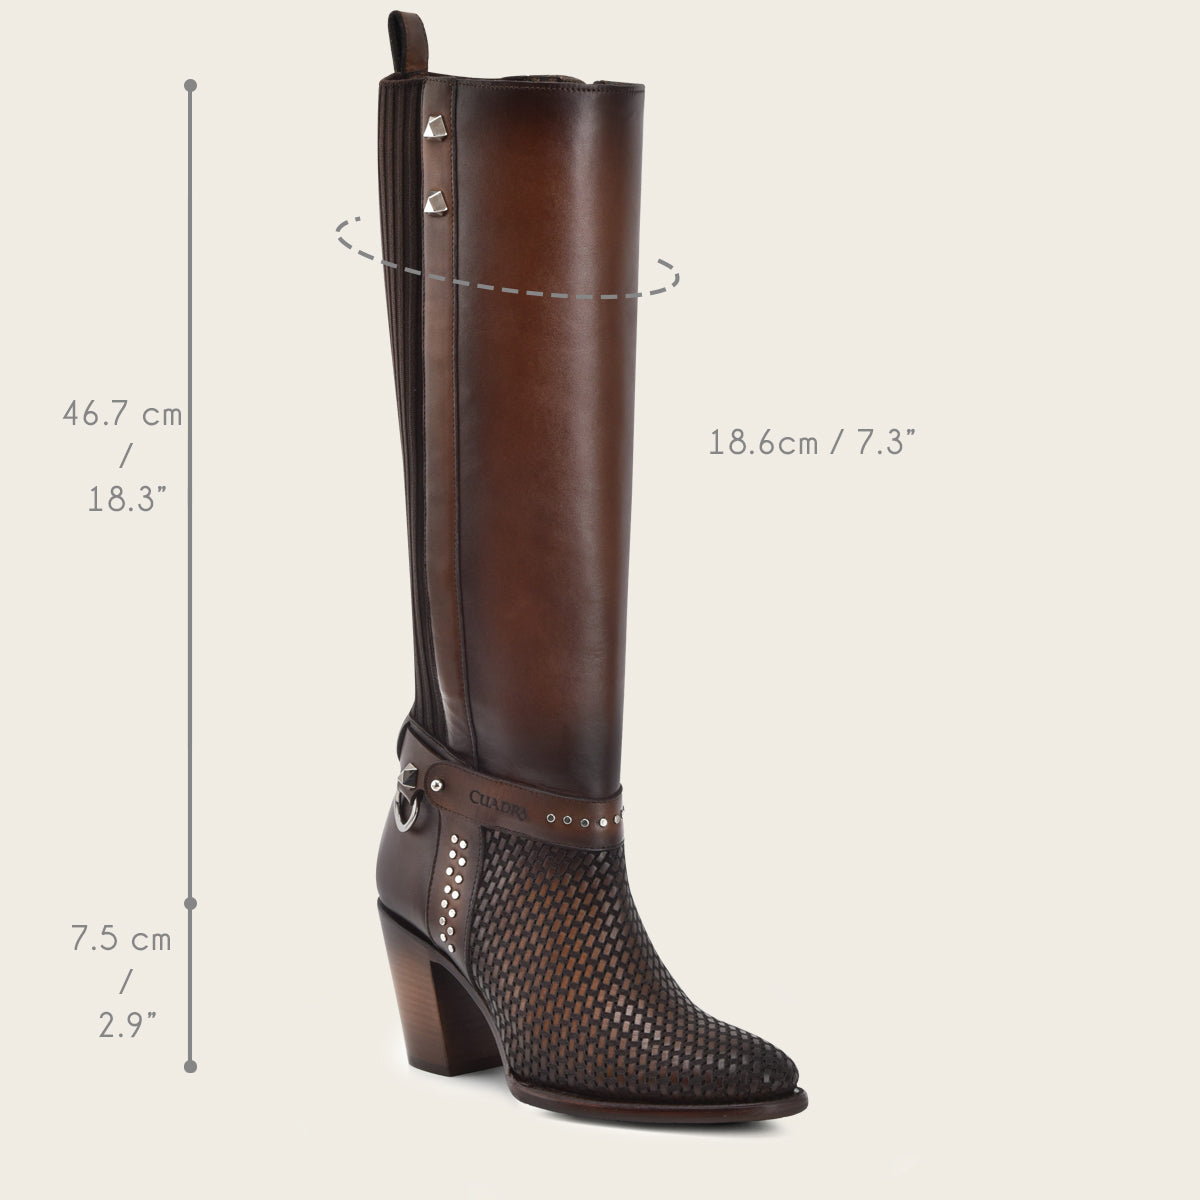 Stylish brown honey leather tall boot